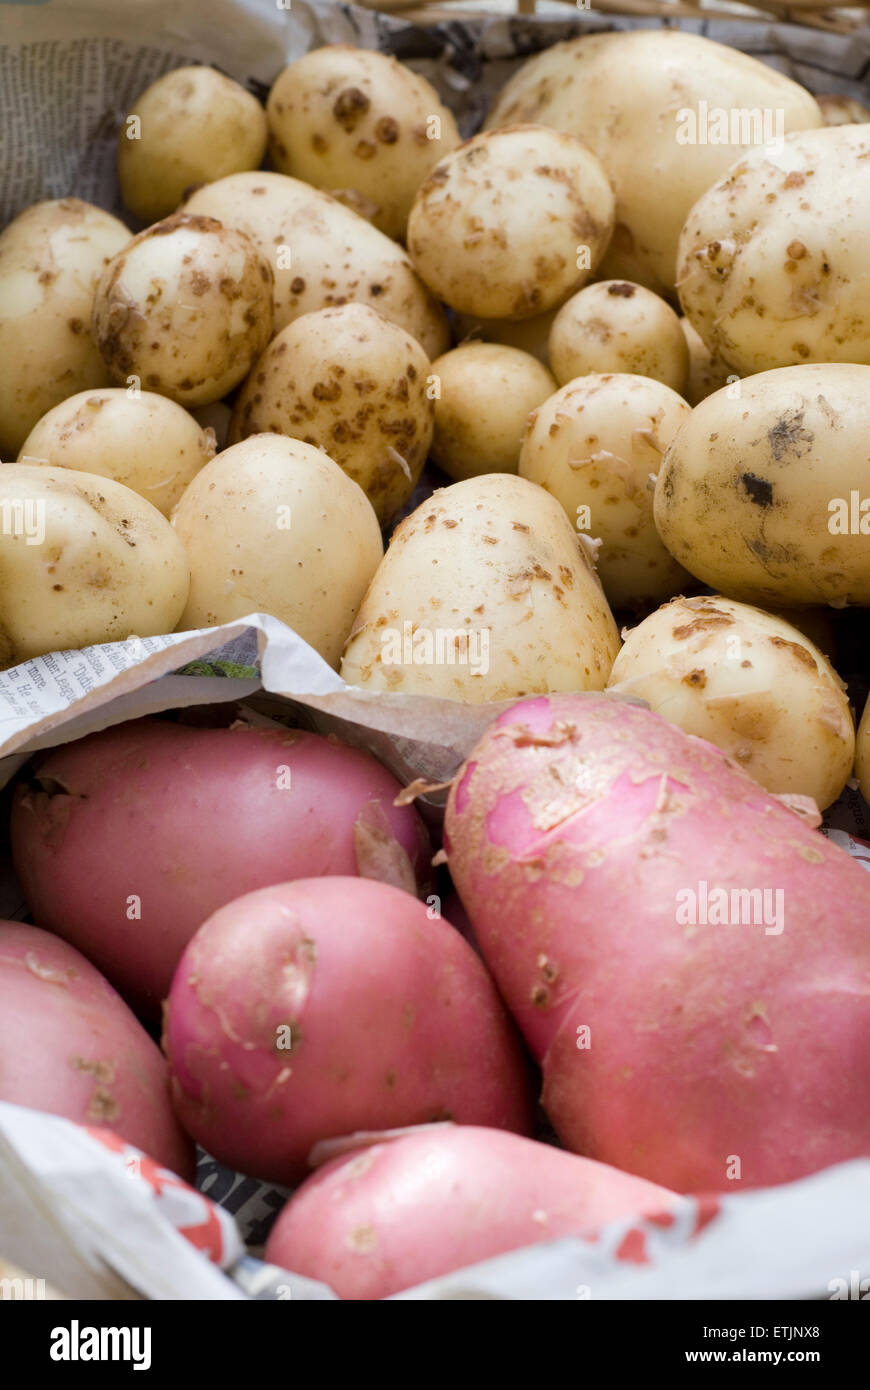 Fresh home grown red and white potatoes, washed and presented in a wicker basket. Garden harvest, UK Stock Photo